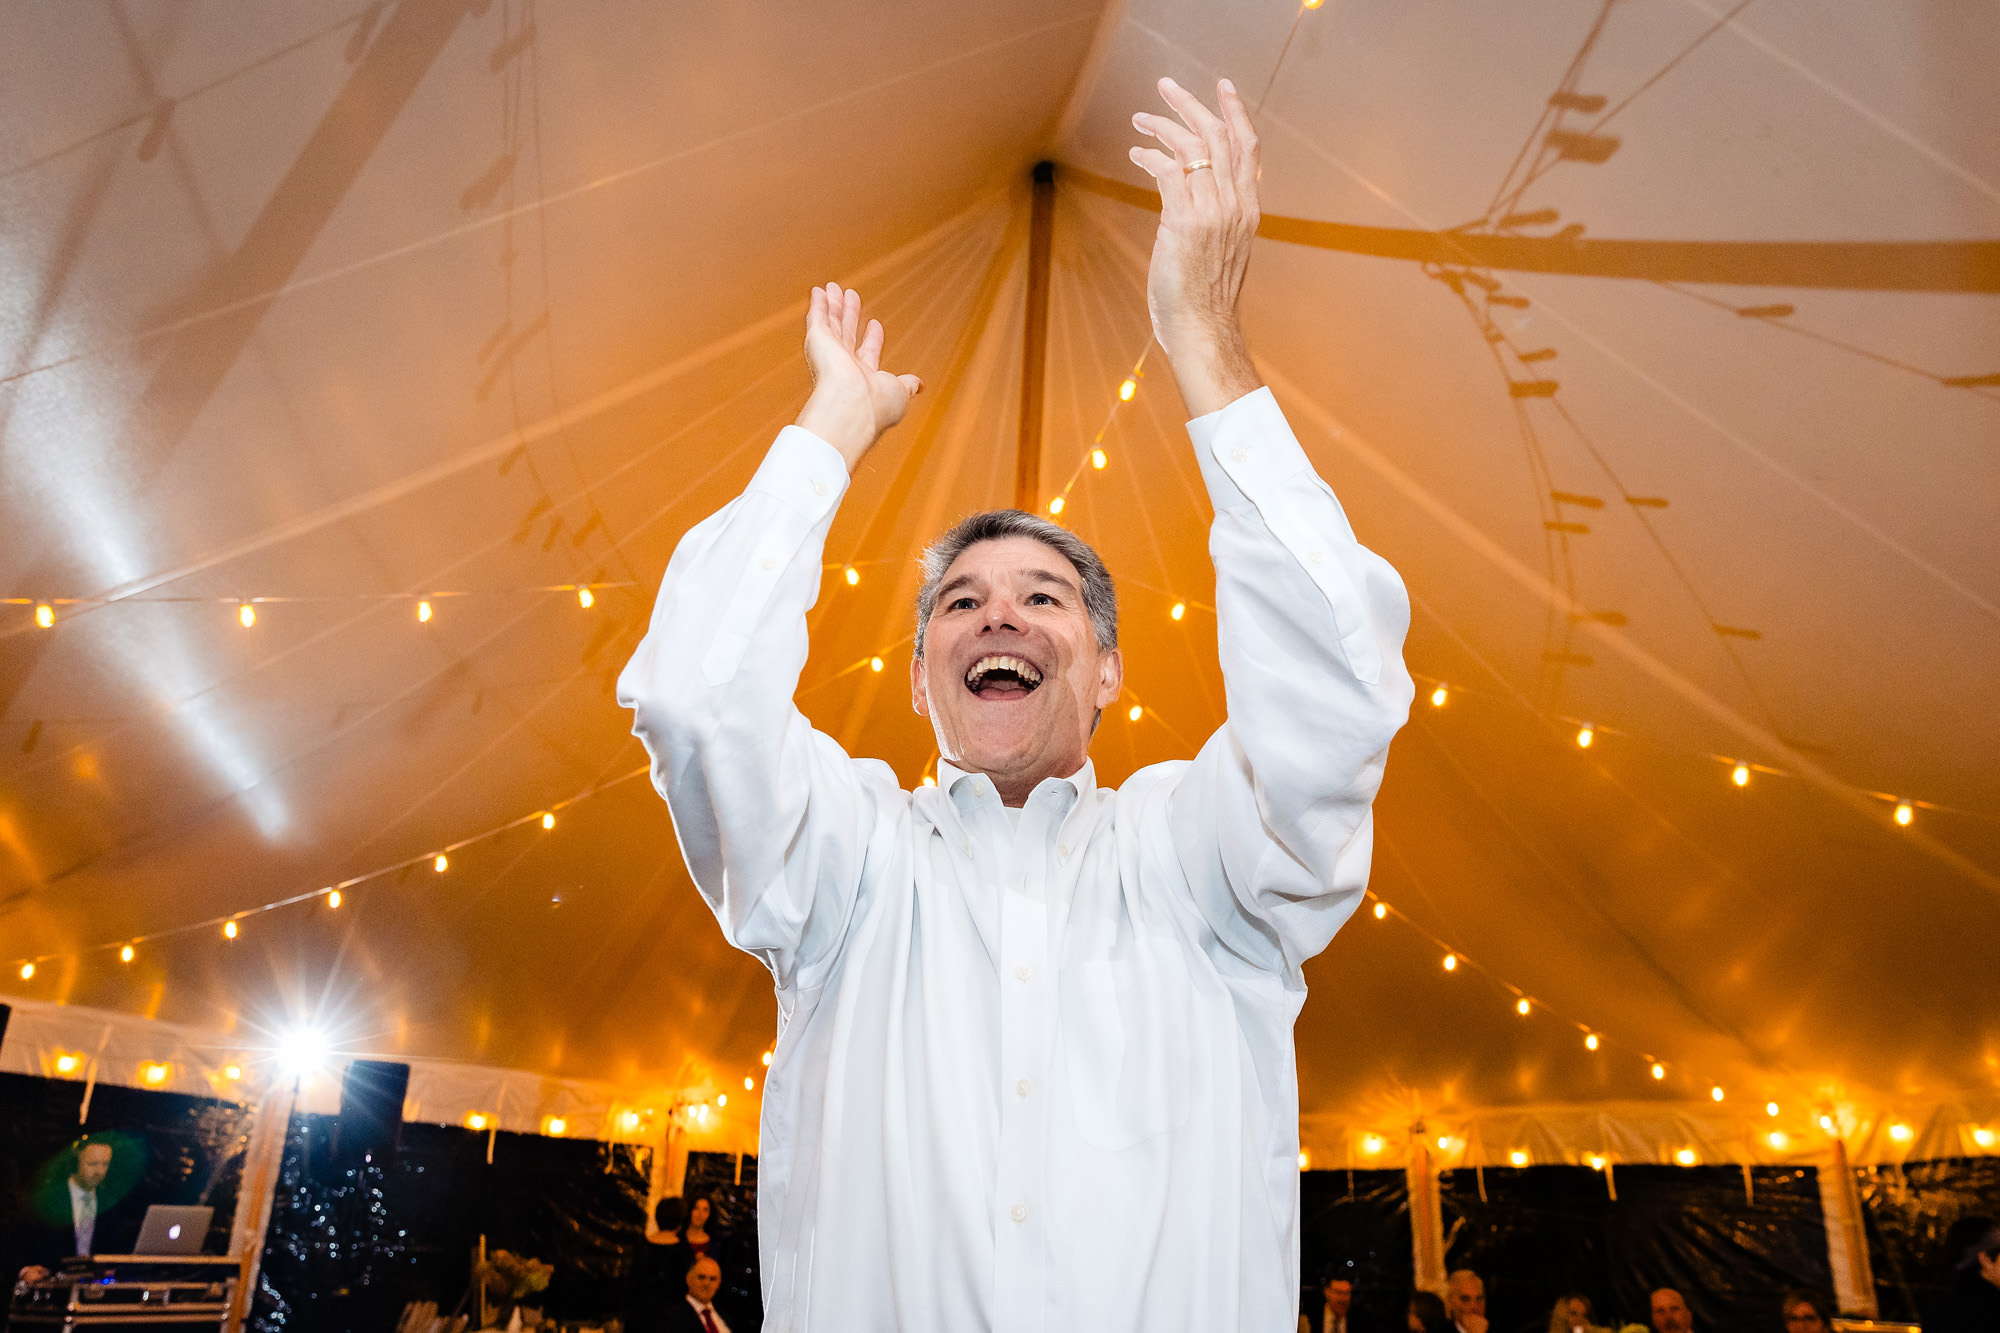 A man dances with his hands in the air at a wedding reception.